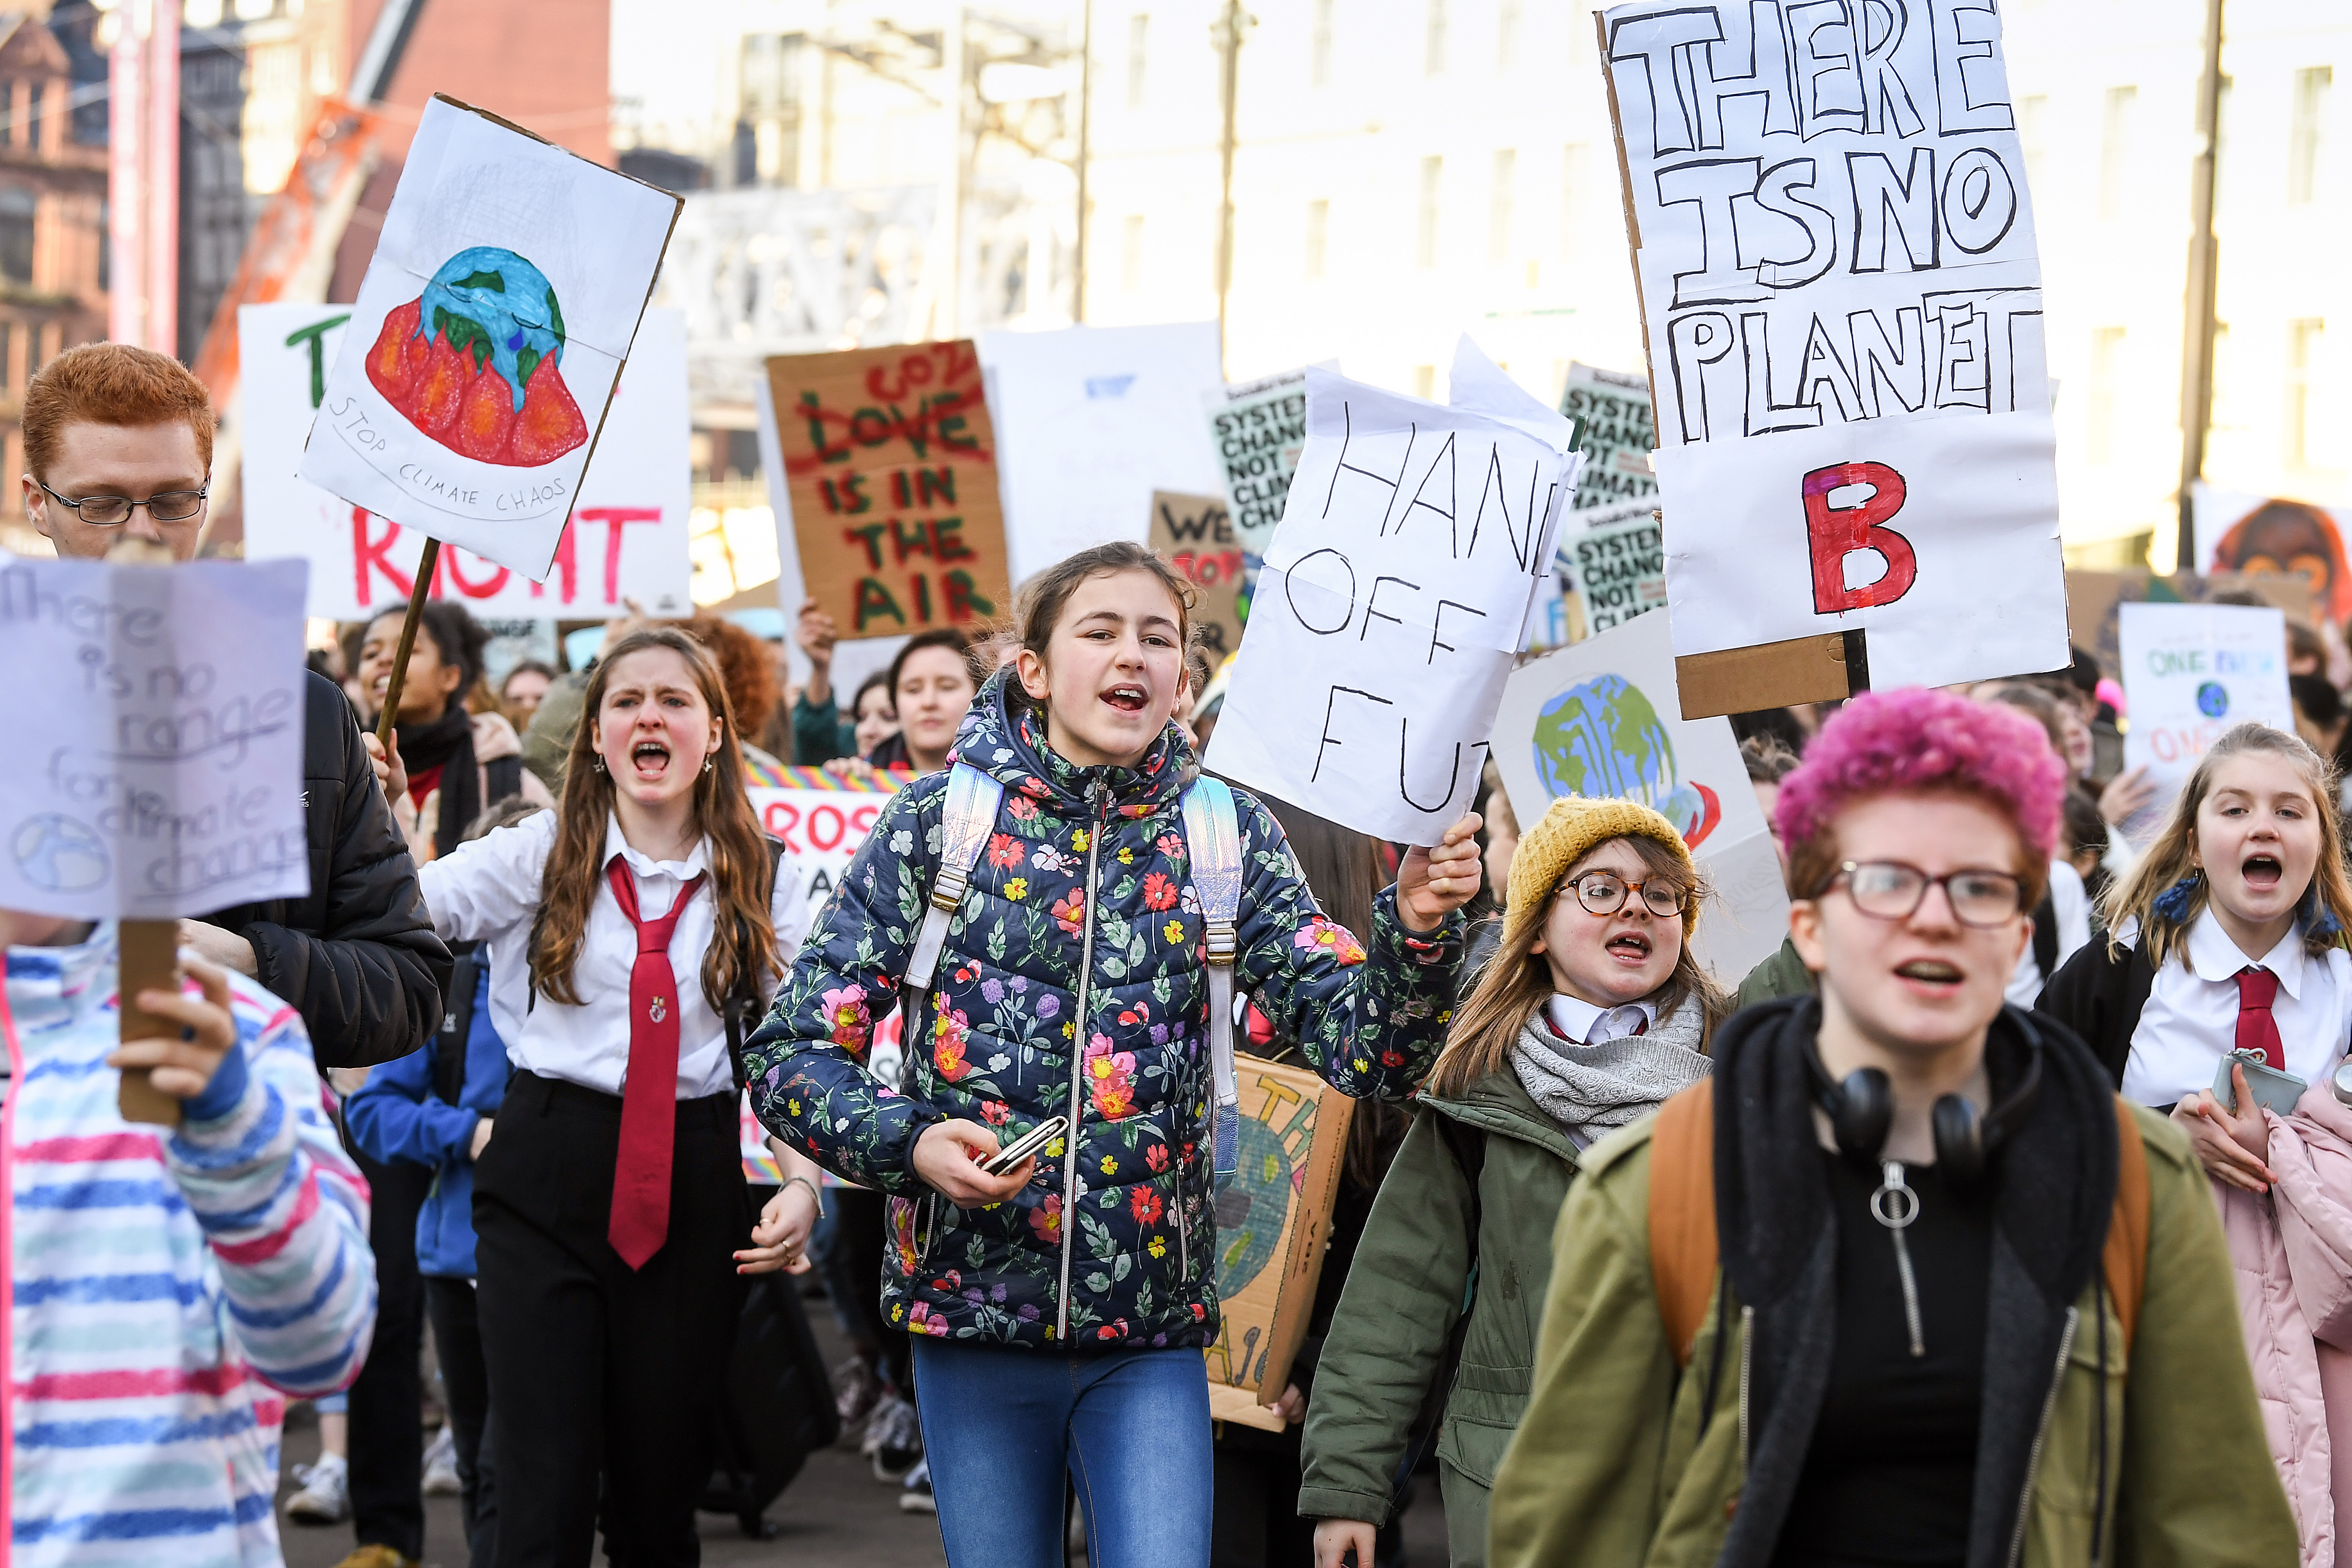 GLASGOW, UNITED KINGDOM - FEBRUARY 15: Schoolchildren take part in a nation-wide student climate march in George Square on February 15, 2019 in Glasgow, United Kingdom.Thousands of UK pupils from schools, colleges and universities will walk out today for a nationwide climate change strike. Students in 60 cities from the West Country to Scotland are protesting, urging the government to declare a climate emergency and take action over the problem. They are keen that the national curriculum is reformed and the environmental crisis is communicated to the public. Similar strikes have taken place in Australia and in European countries such as Belgium and Sweden. (Photo by Jeff J Mitchell/Getty Images)